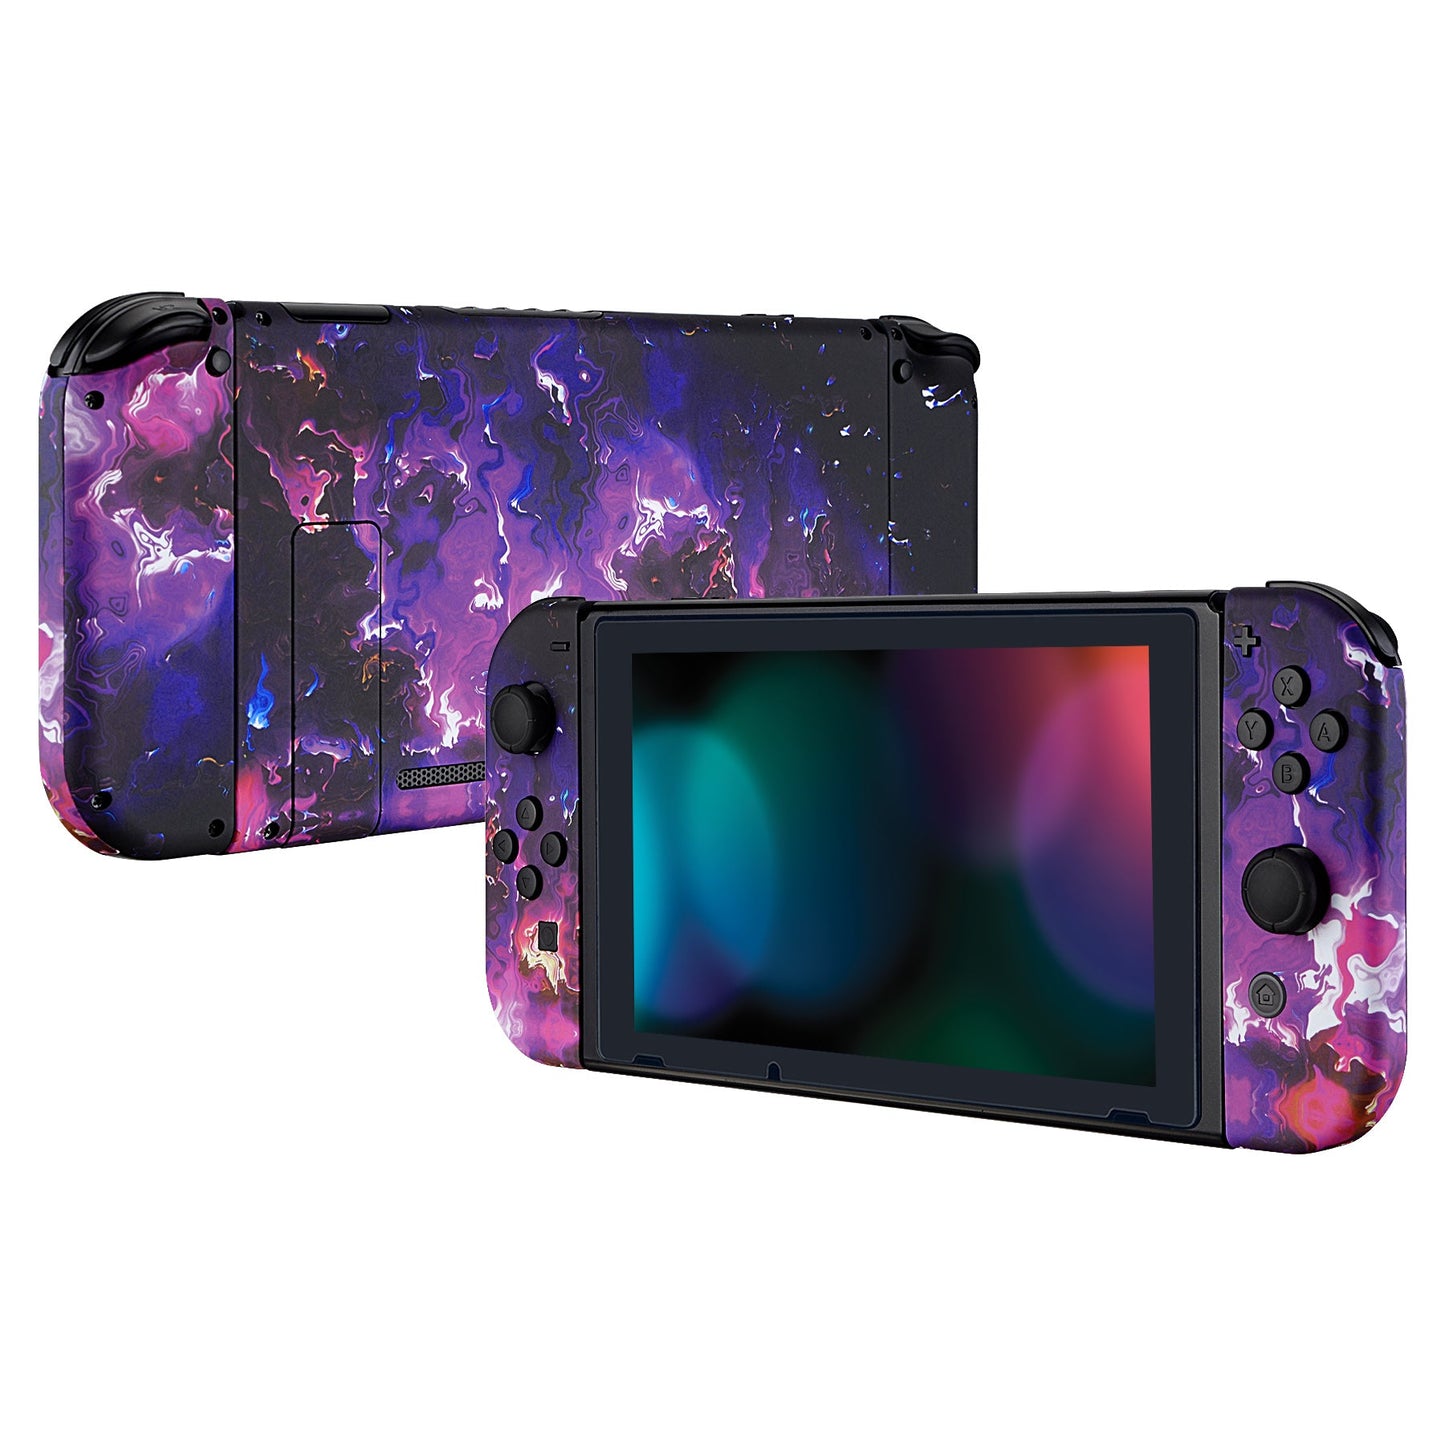 eXtremeRate Retail Back Plate for Nintendo Switch Console, NS Joycon Handheld Controller Housing with Full Set Buttons, DIY Replacement Shell for Nintendo Switch - Surreal Lava - QT109